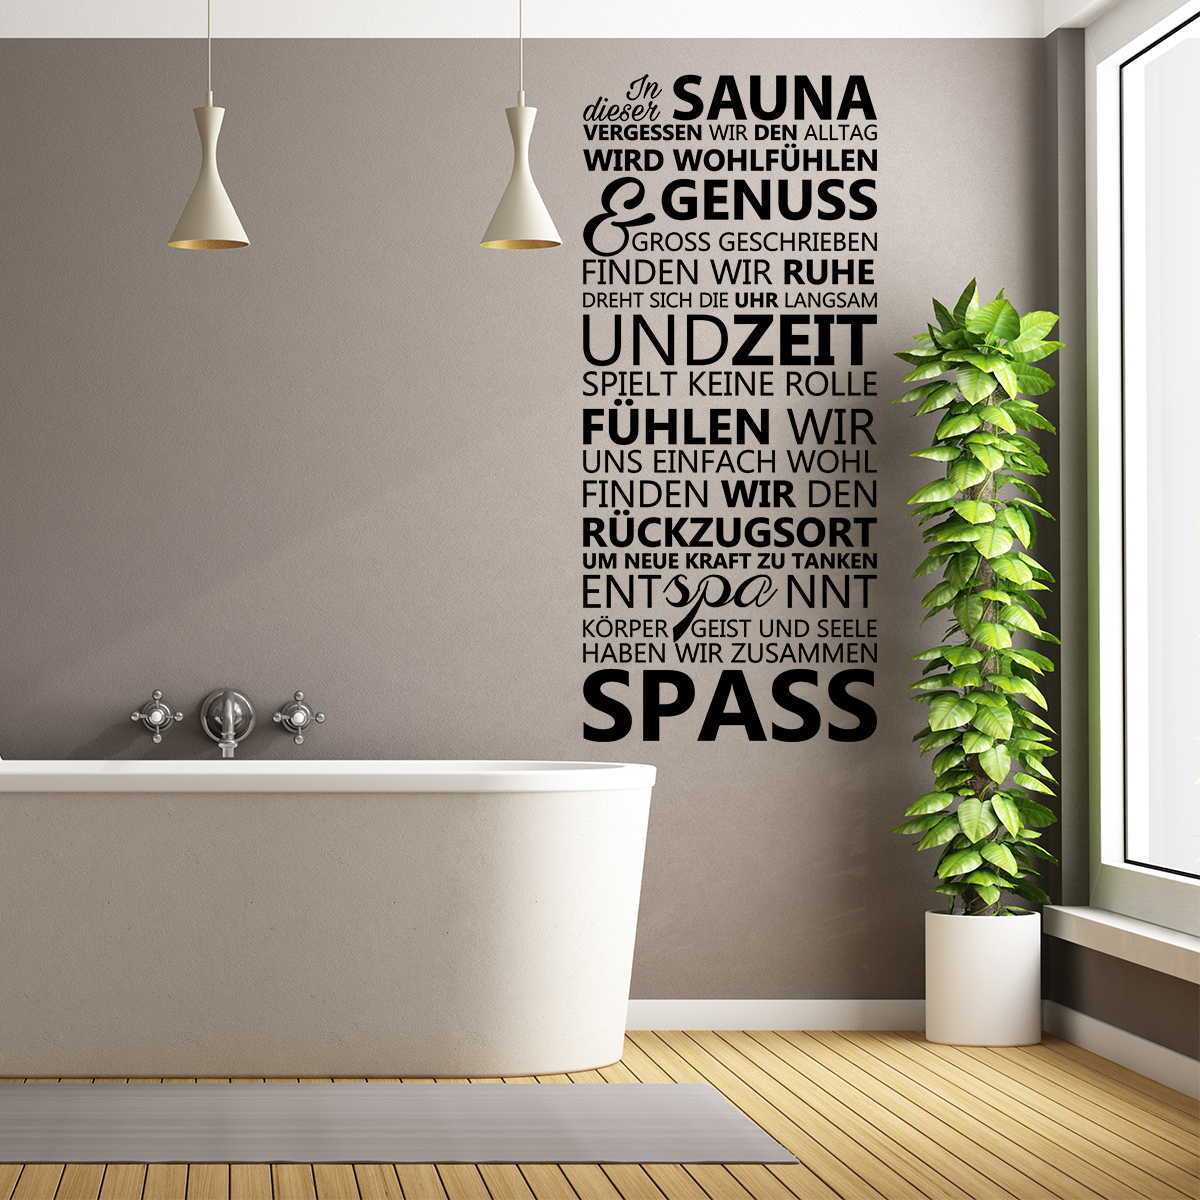 Wall decal quote in dieser sauna